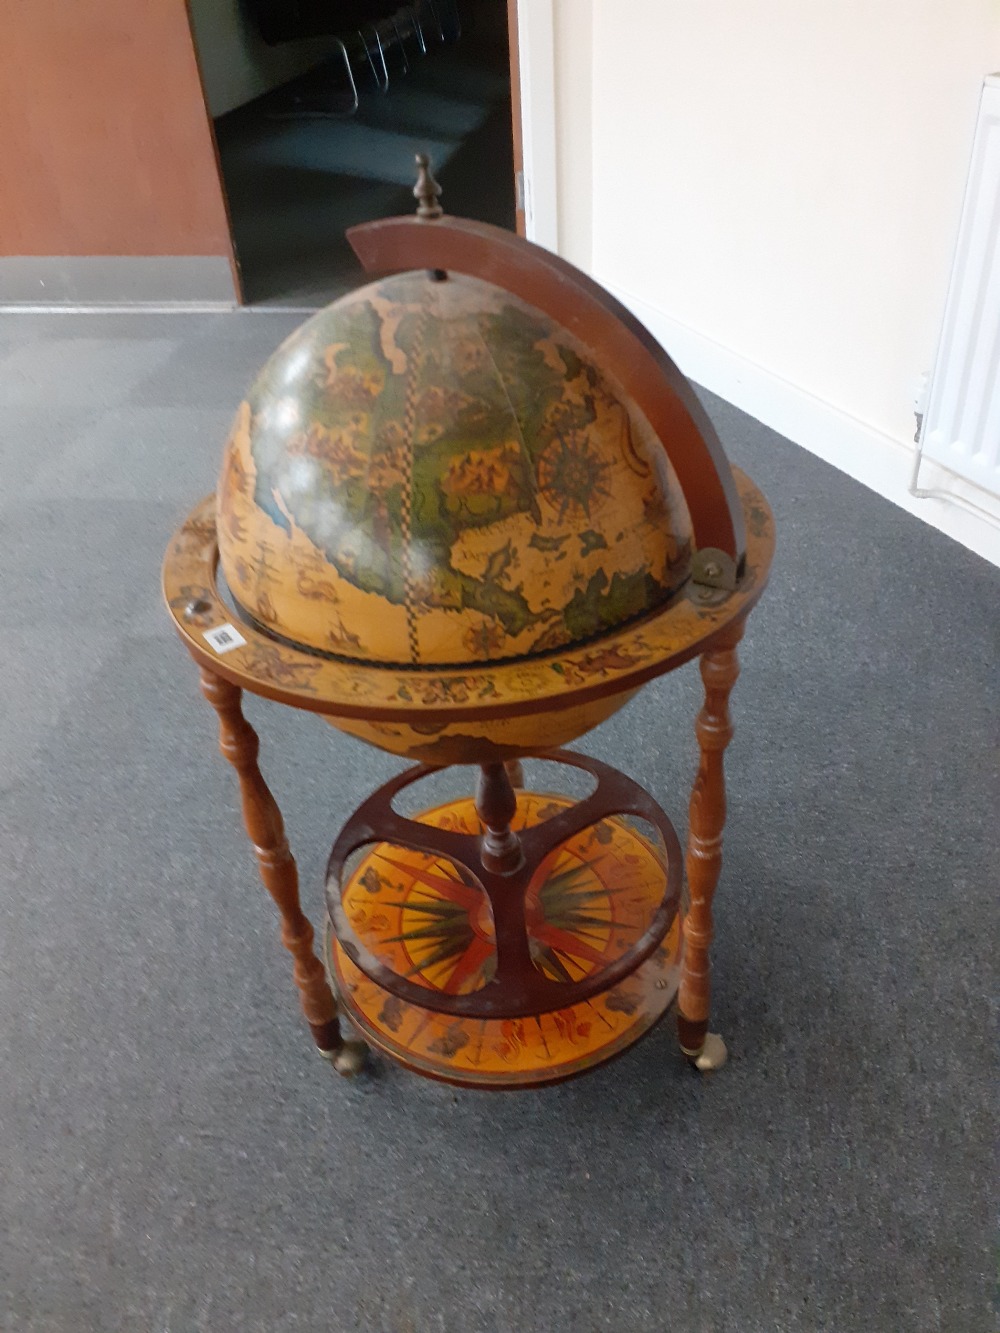 A repro globe Drinks stand